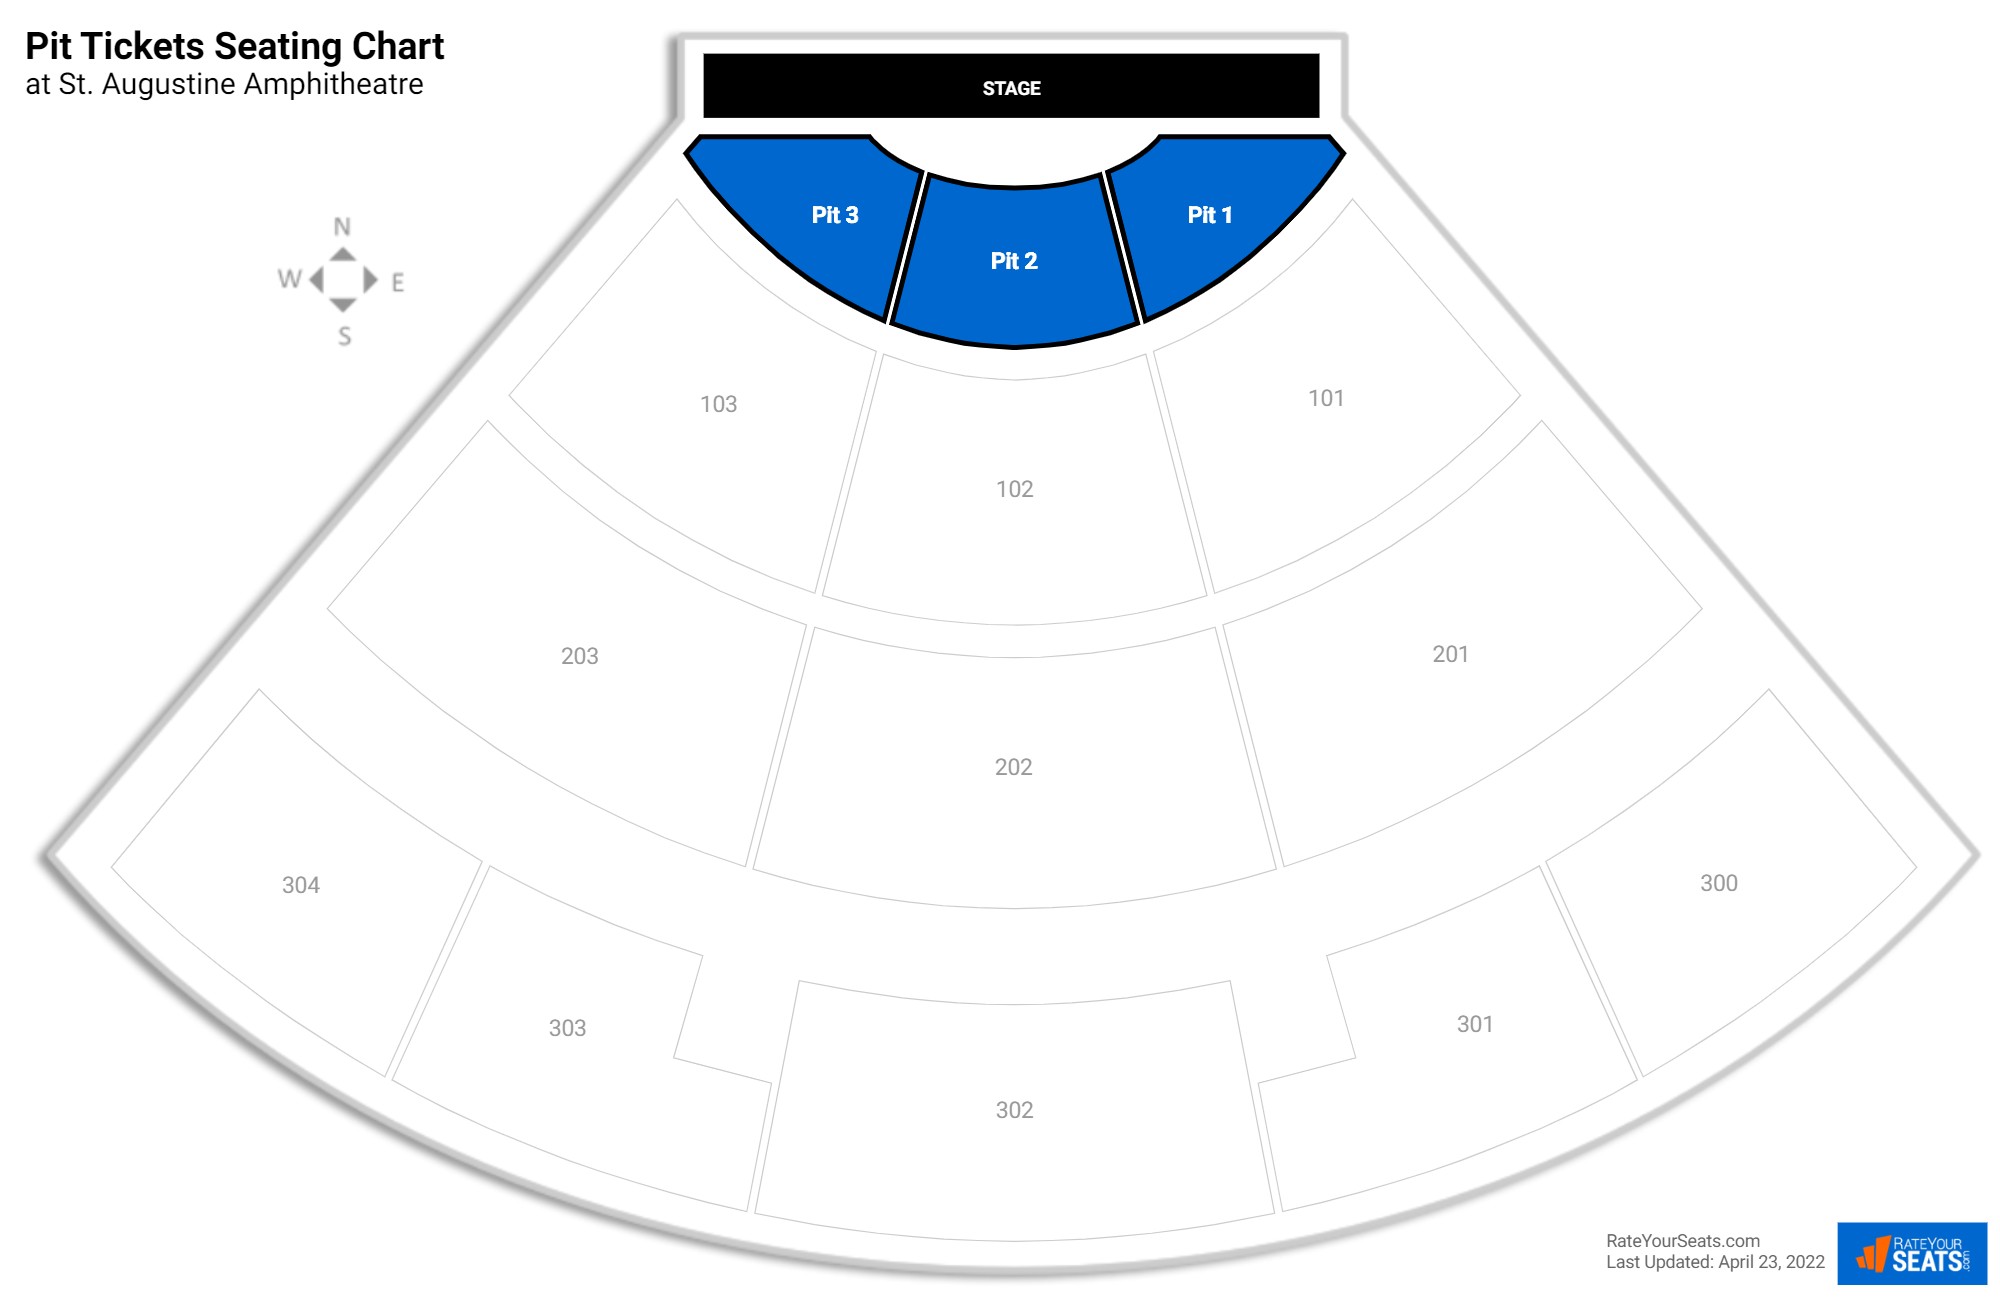 Concert Pit Tickets Seating Chart at St. Augustine Amphitheatre